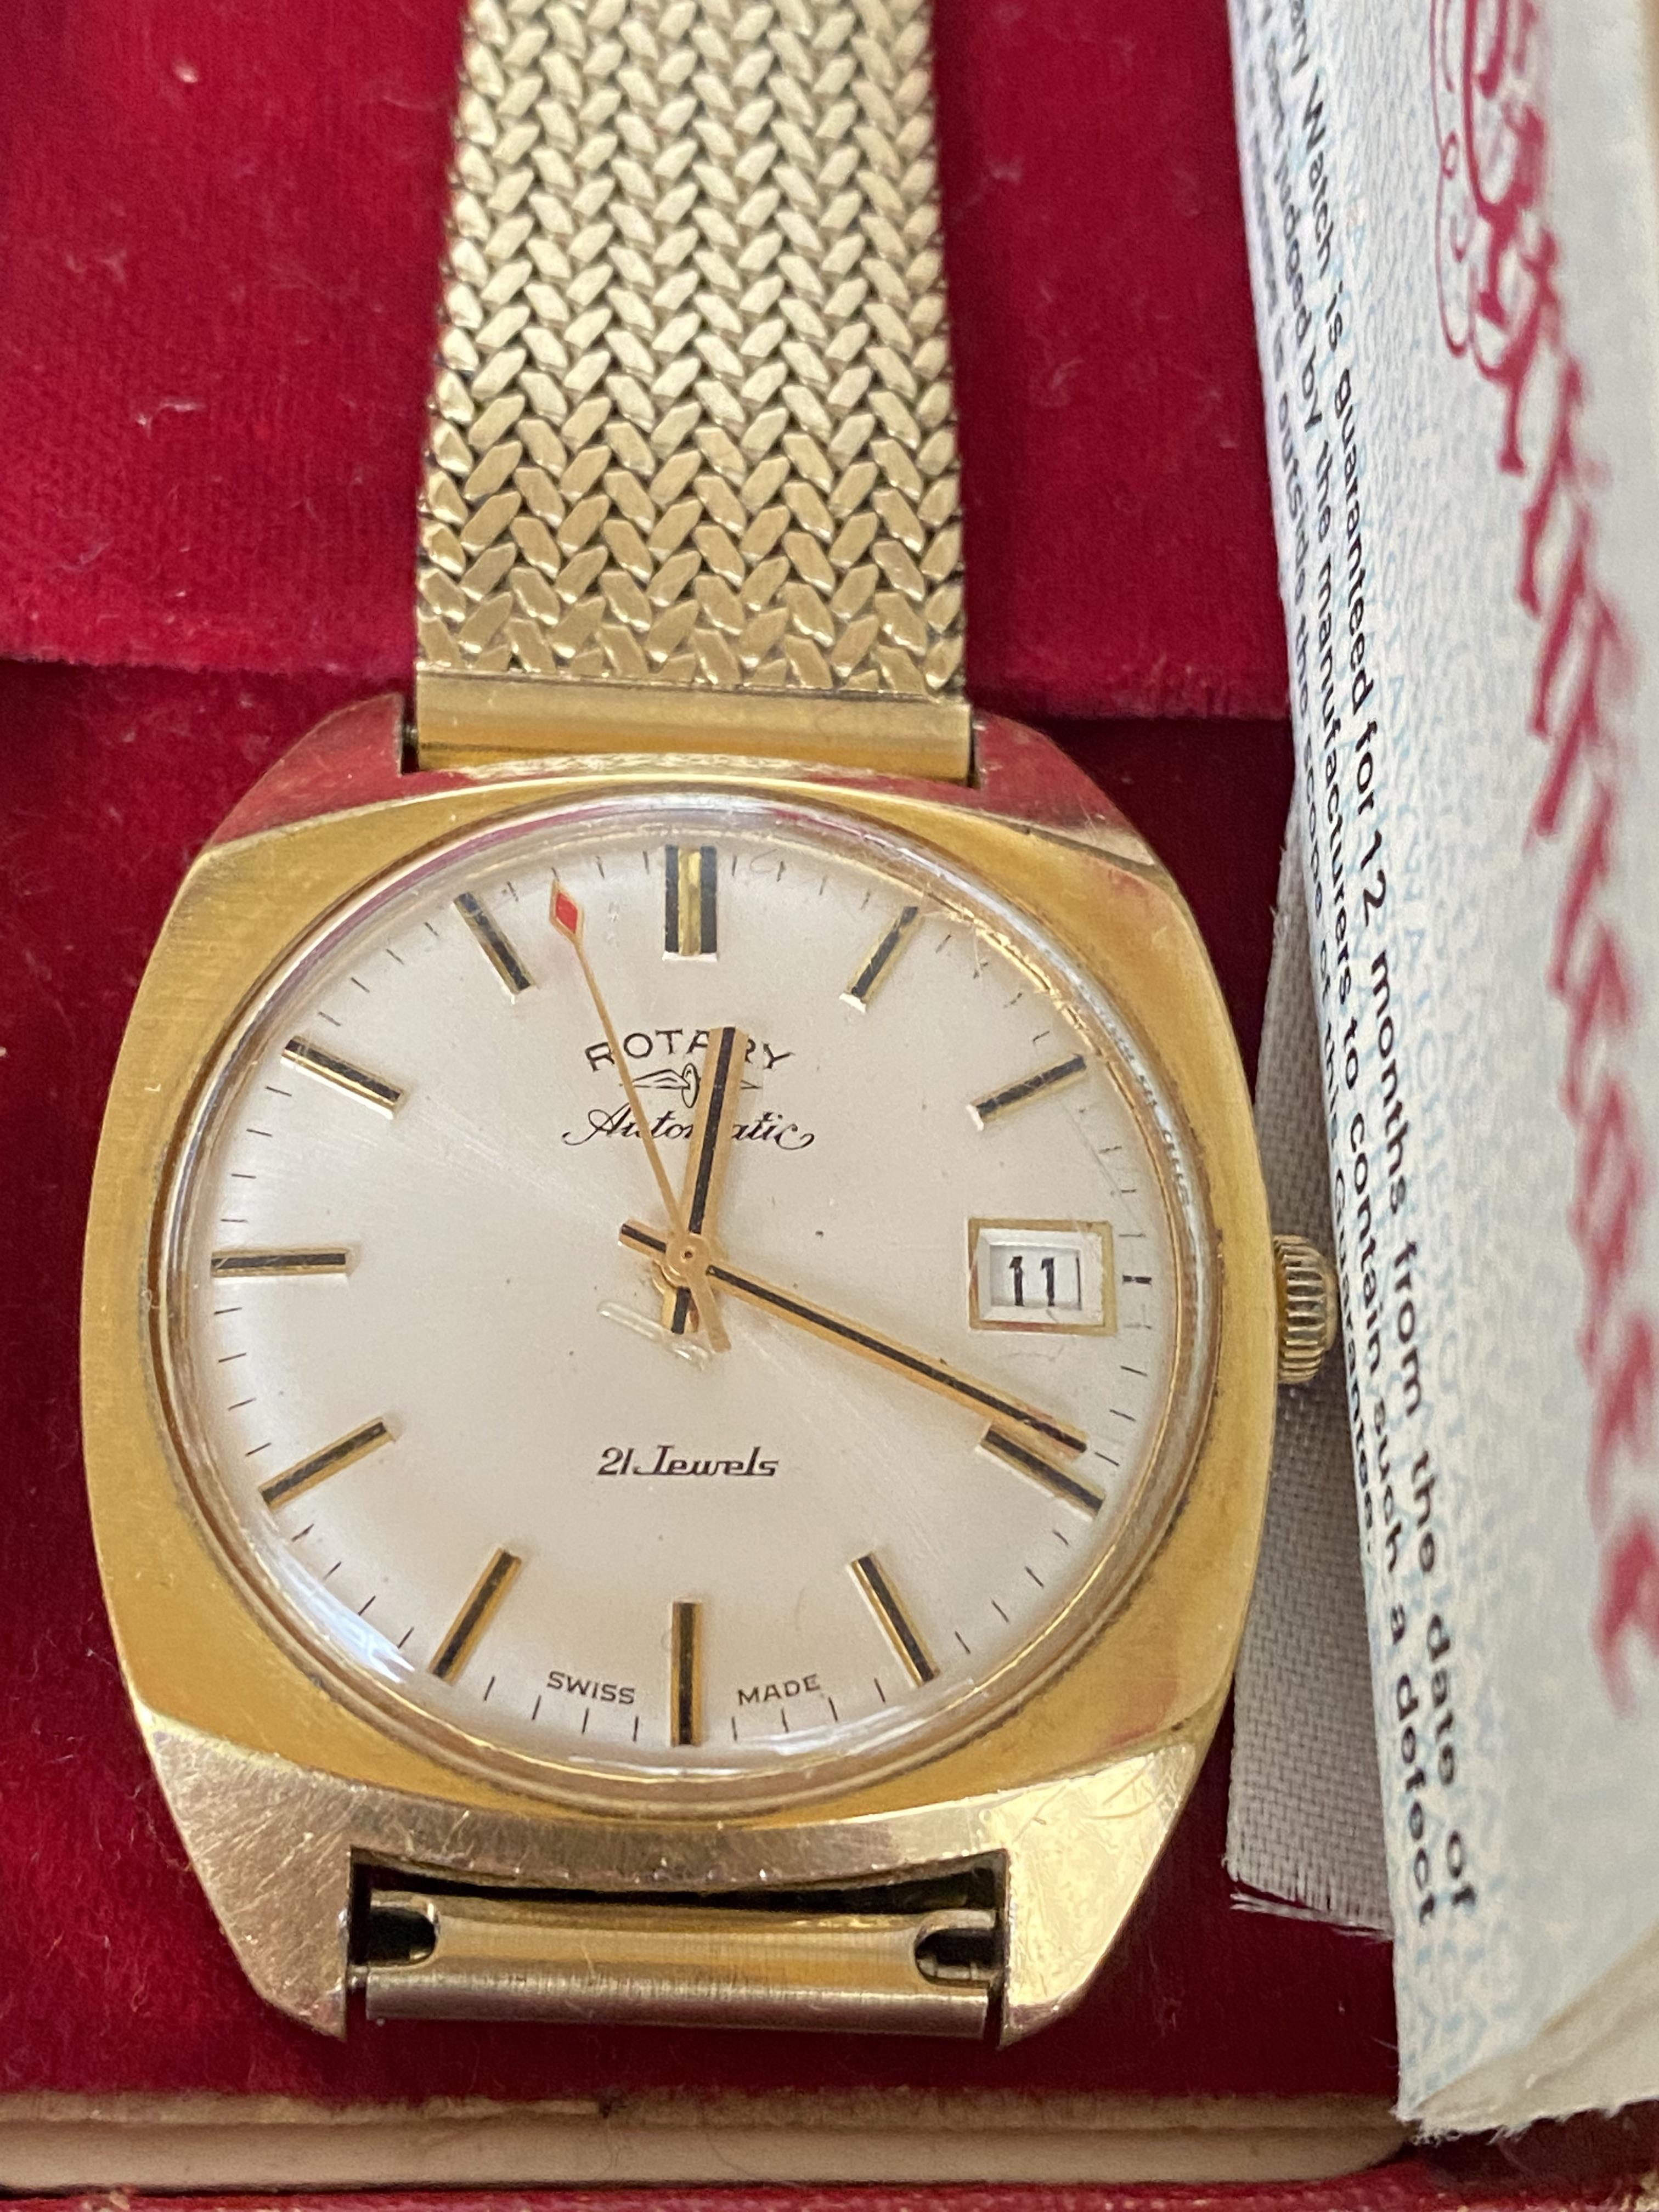 Gents Rotary automatic gold plated wristwatch